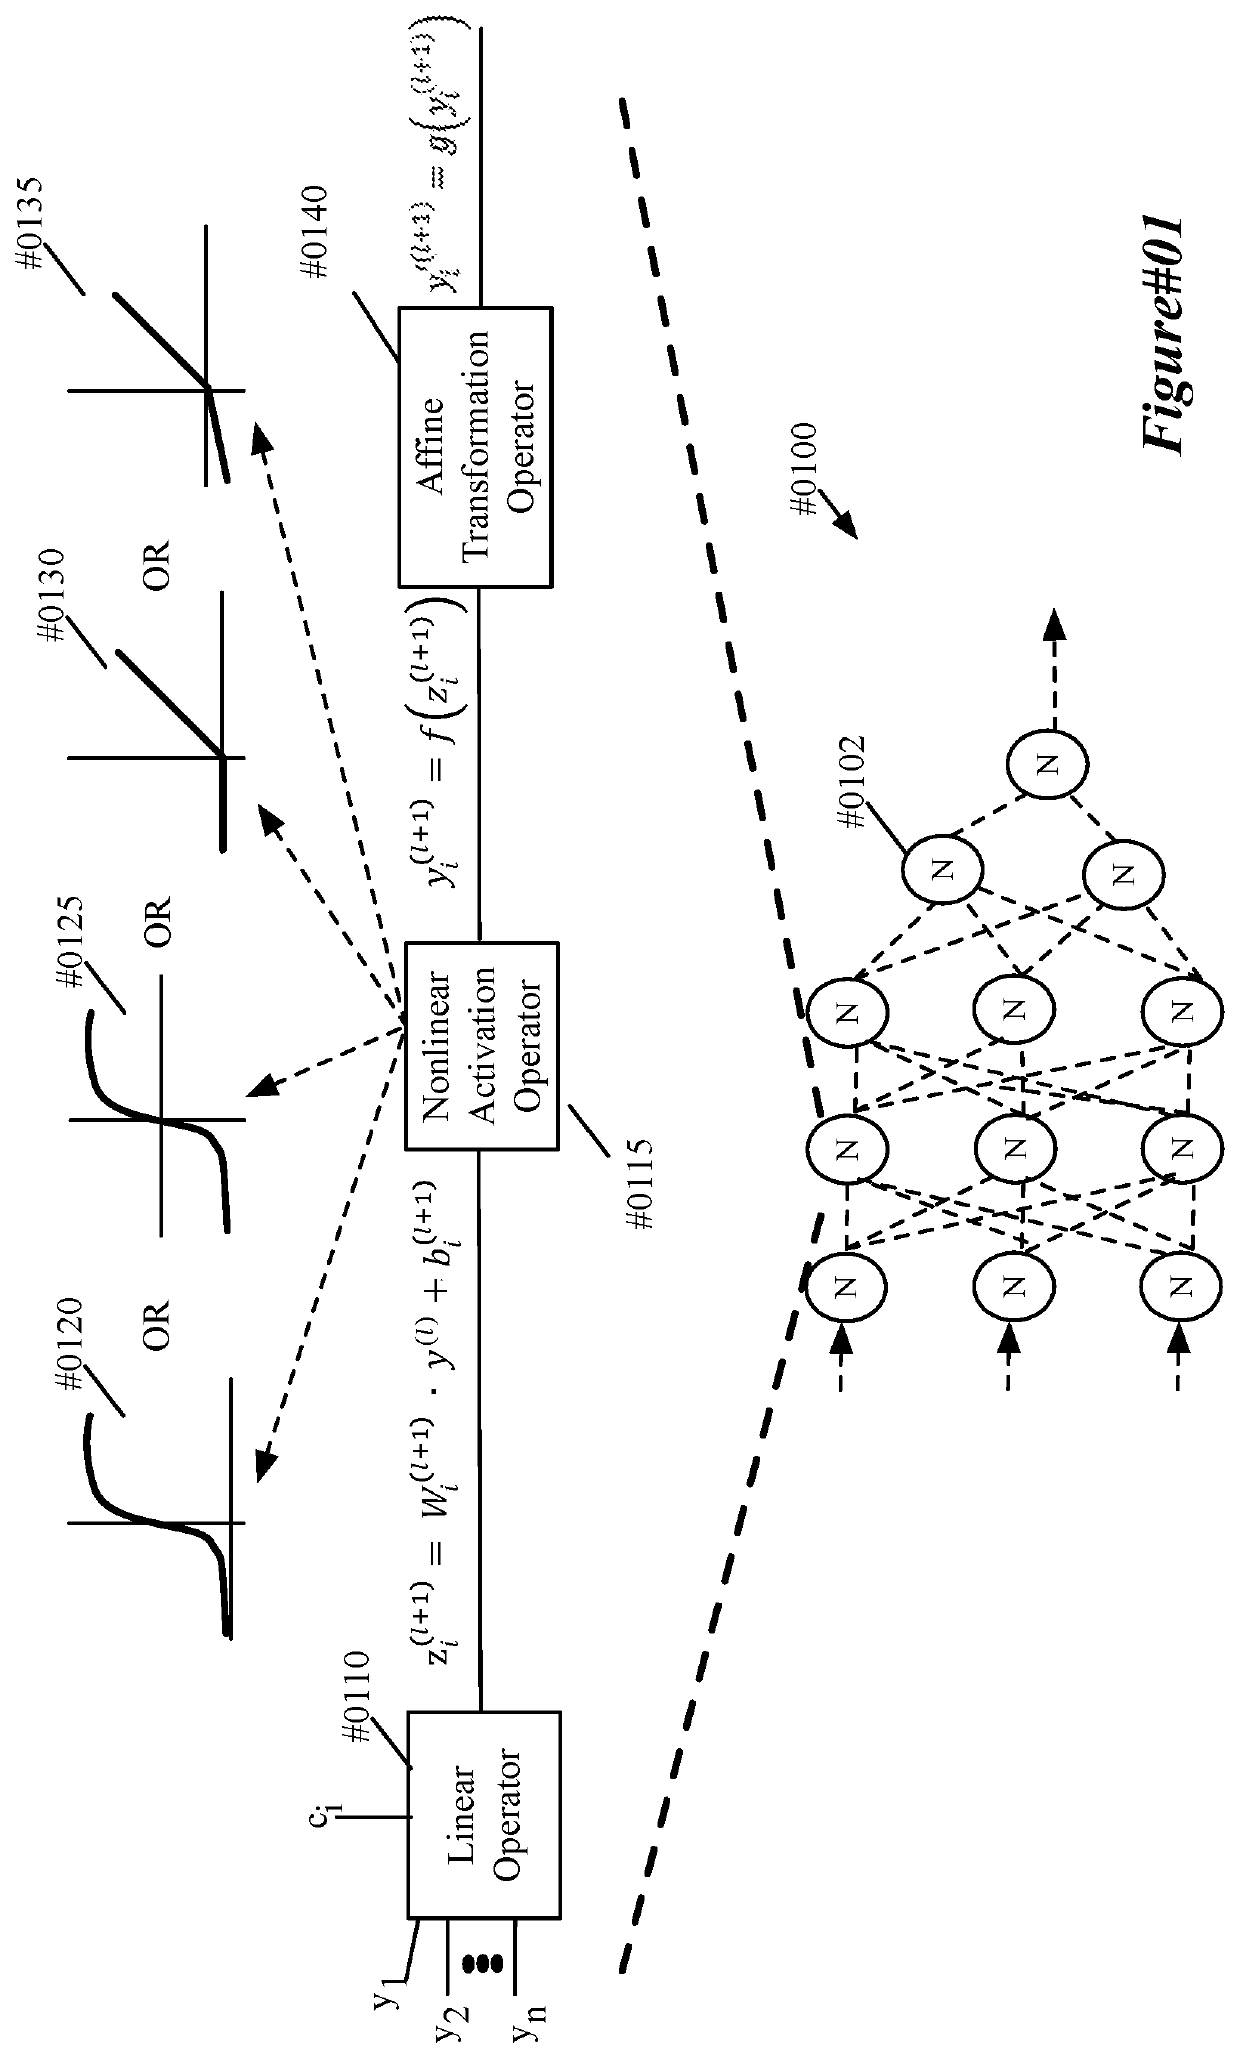 Quantizing neural networks using shifting and scaling